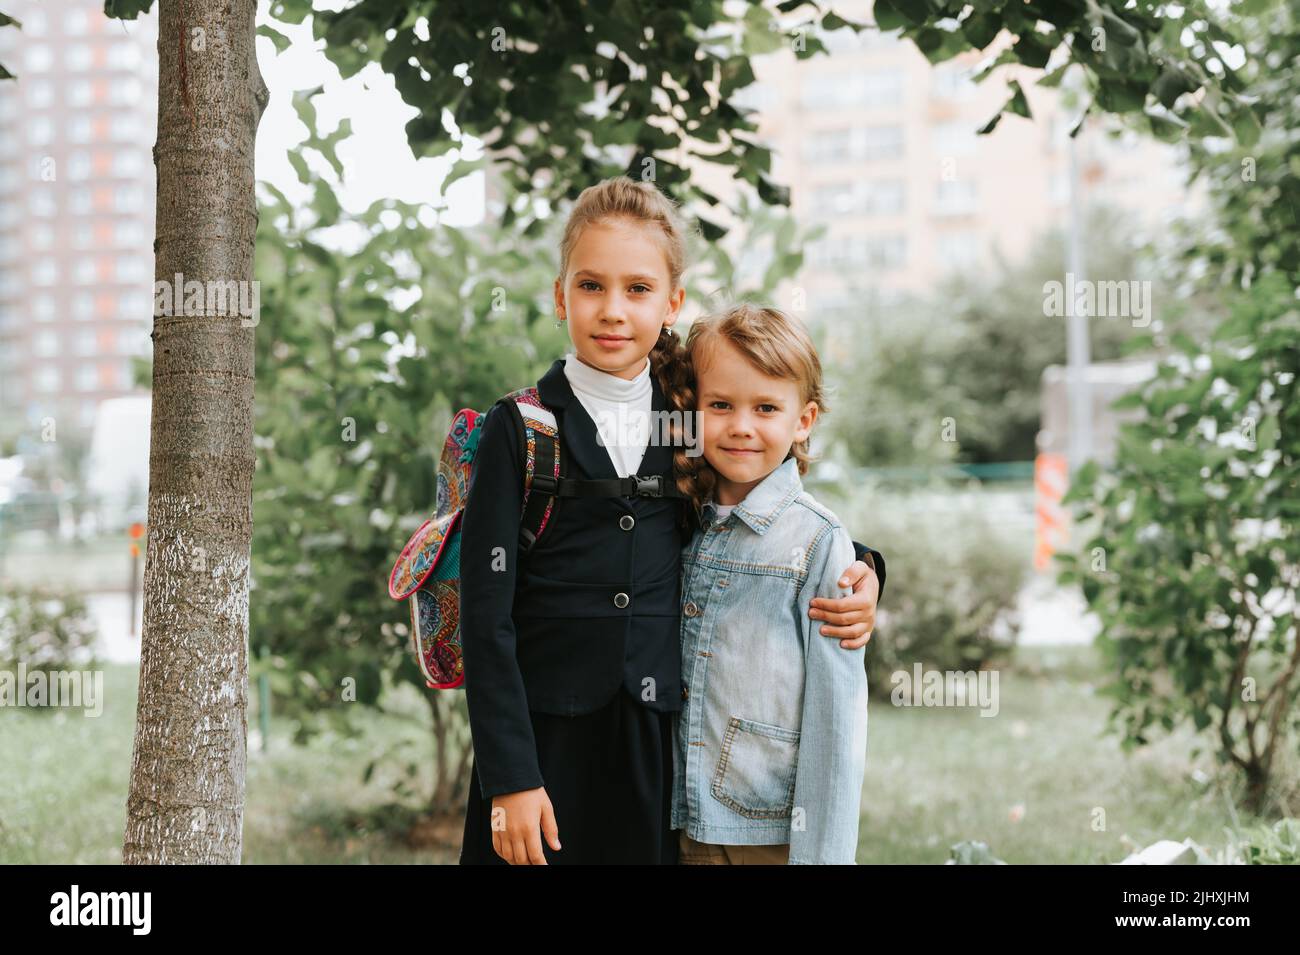 back to school. little happy kid pupil schoolgirl eight years old in fashion uniform with backpack and her preschool brother boy hug together ready go Stock Photo